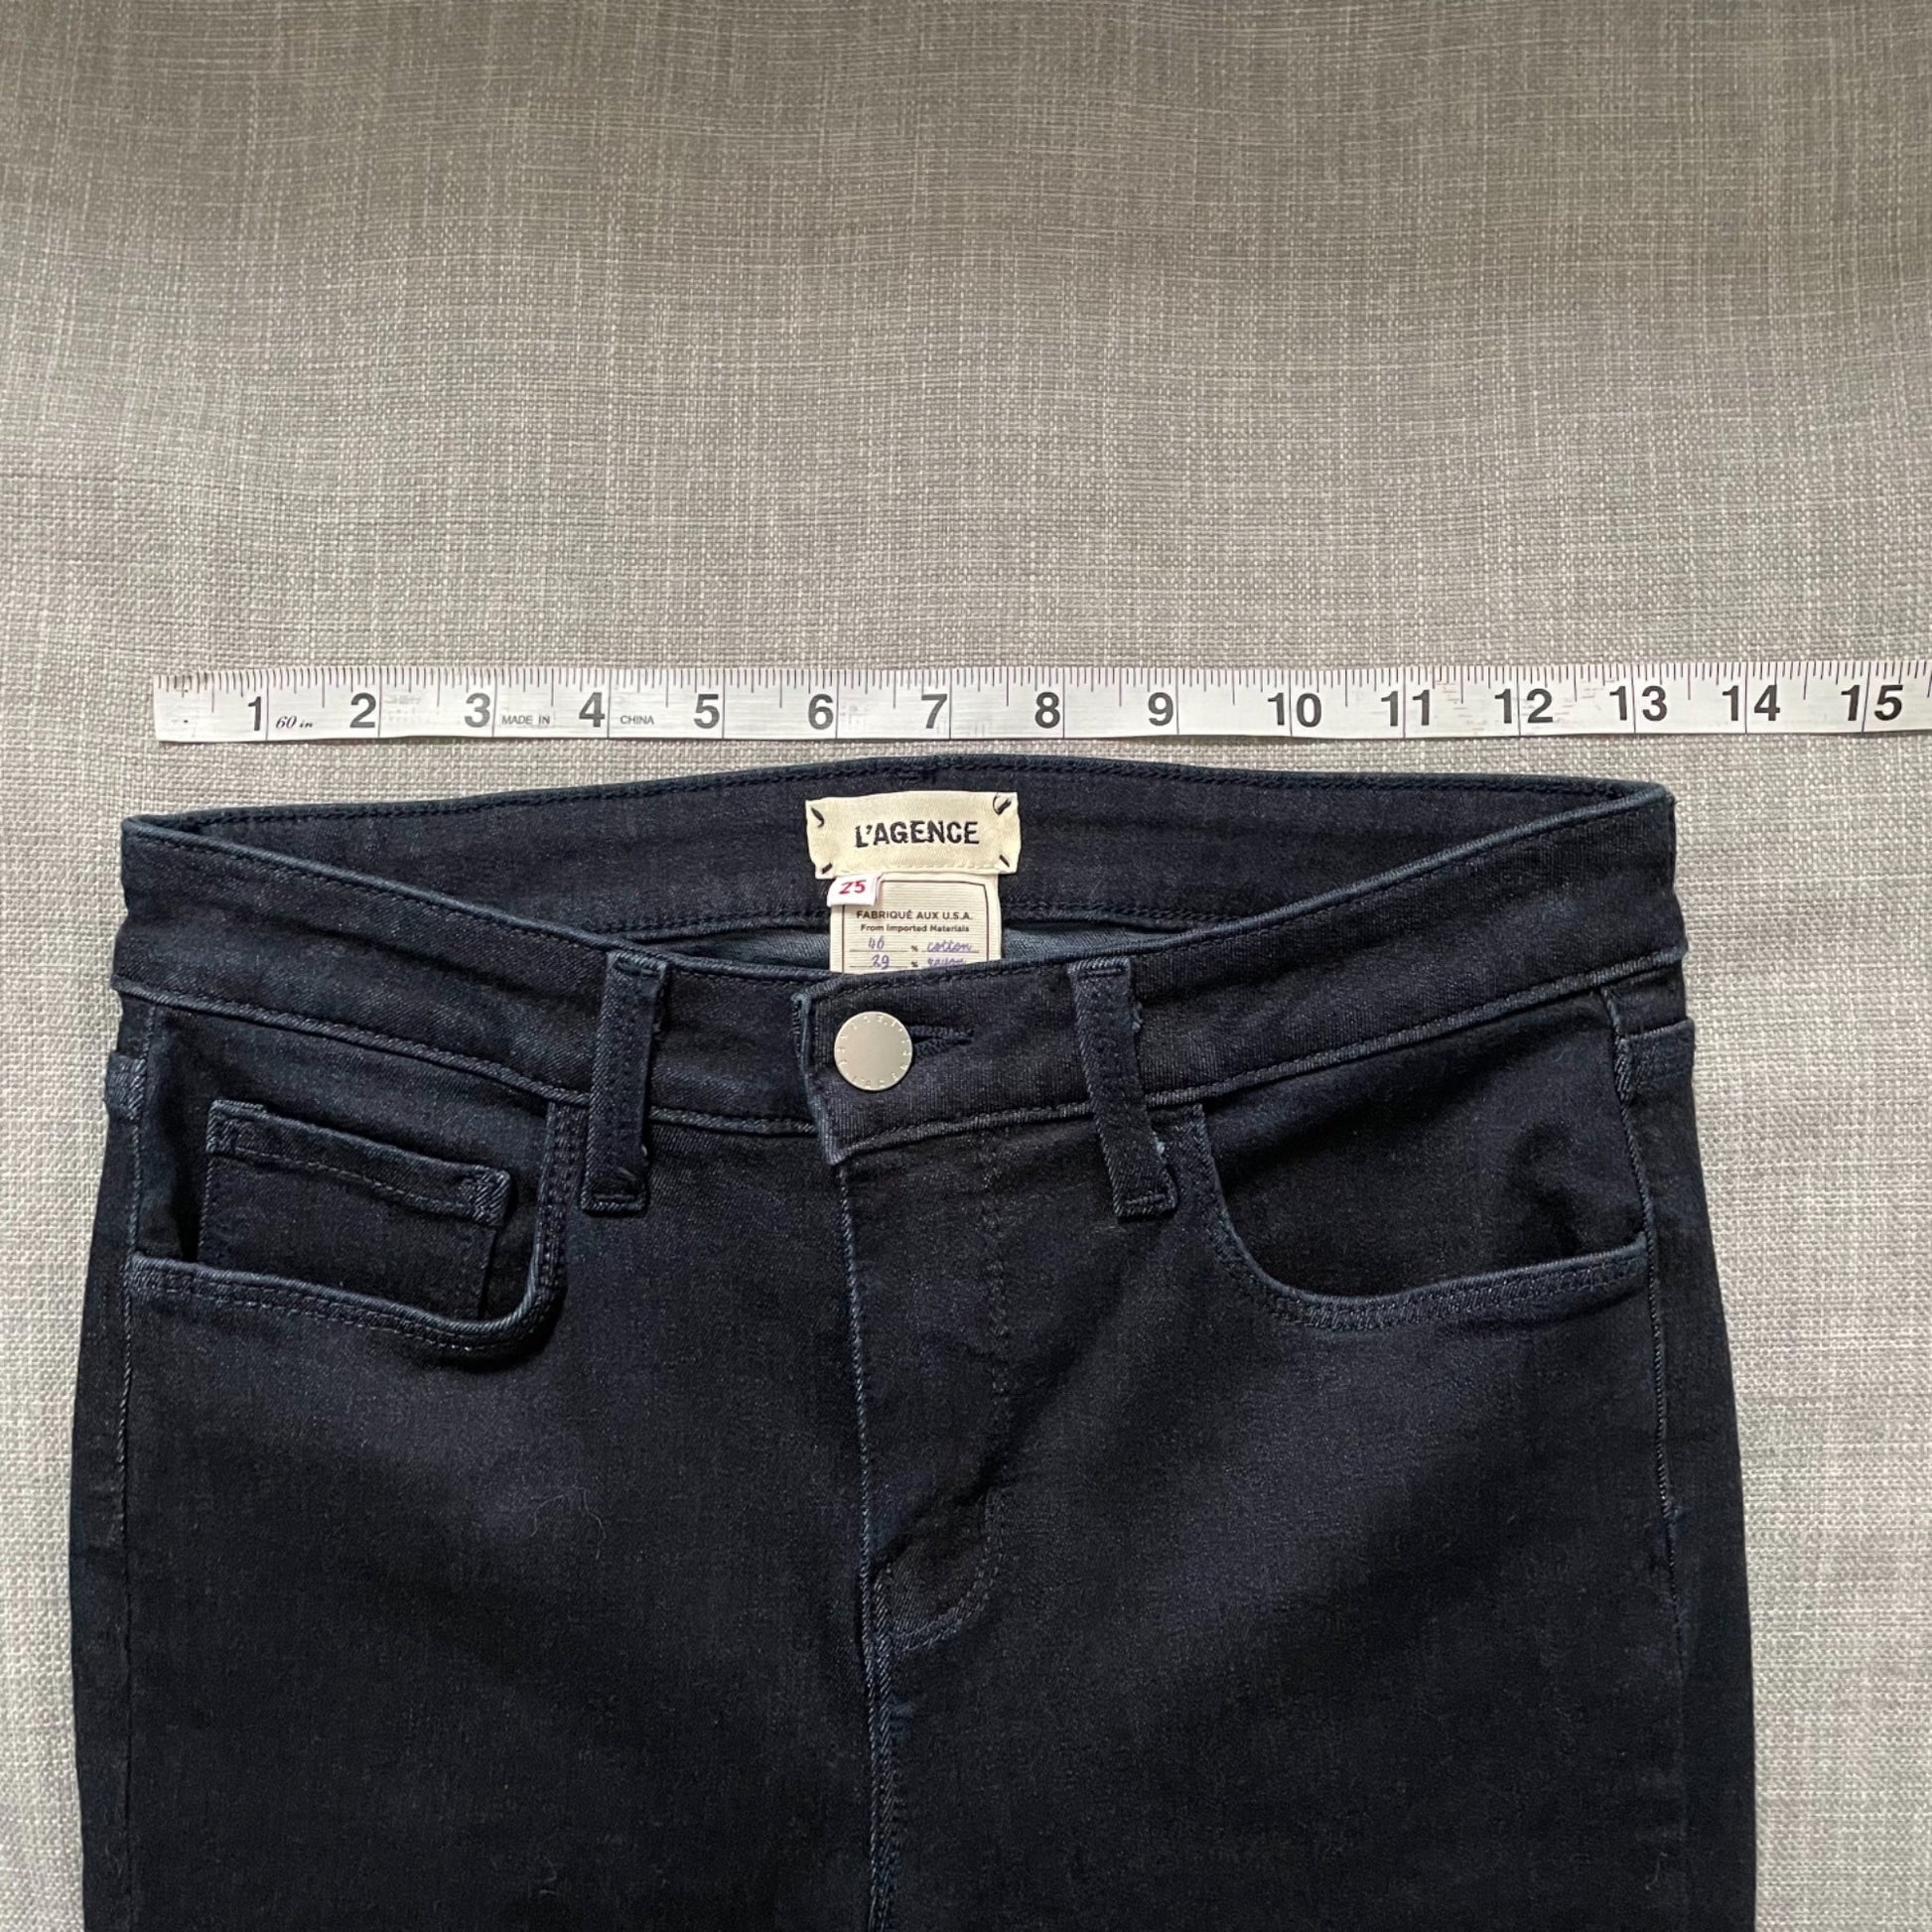 Size 11 & 12 High Rise Women's Jeans